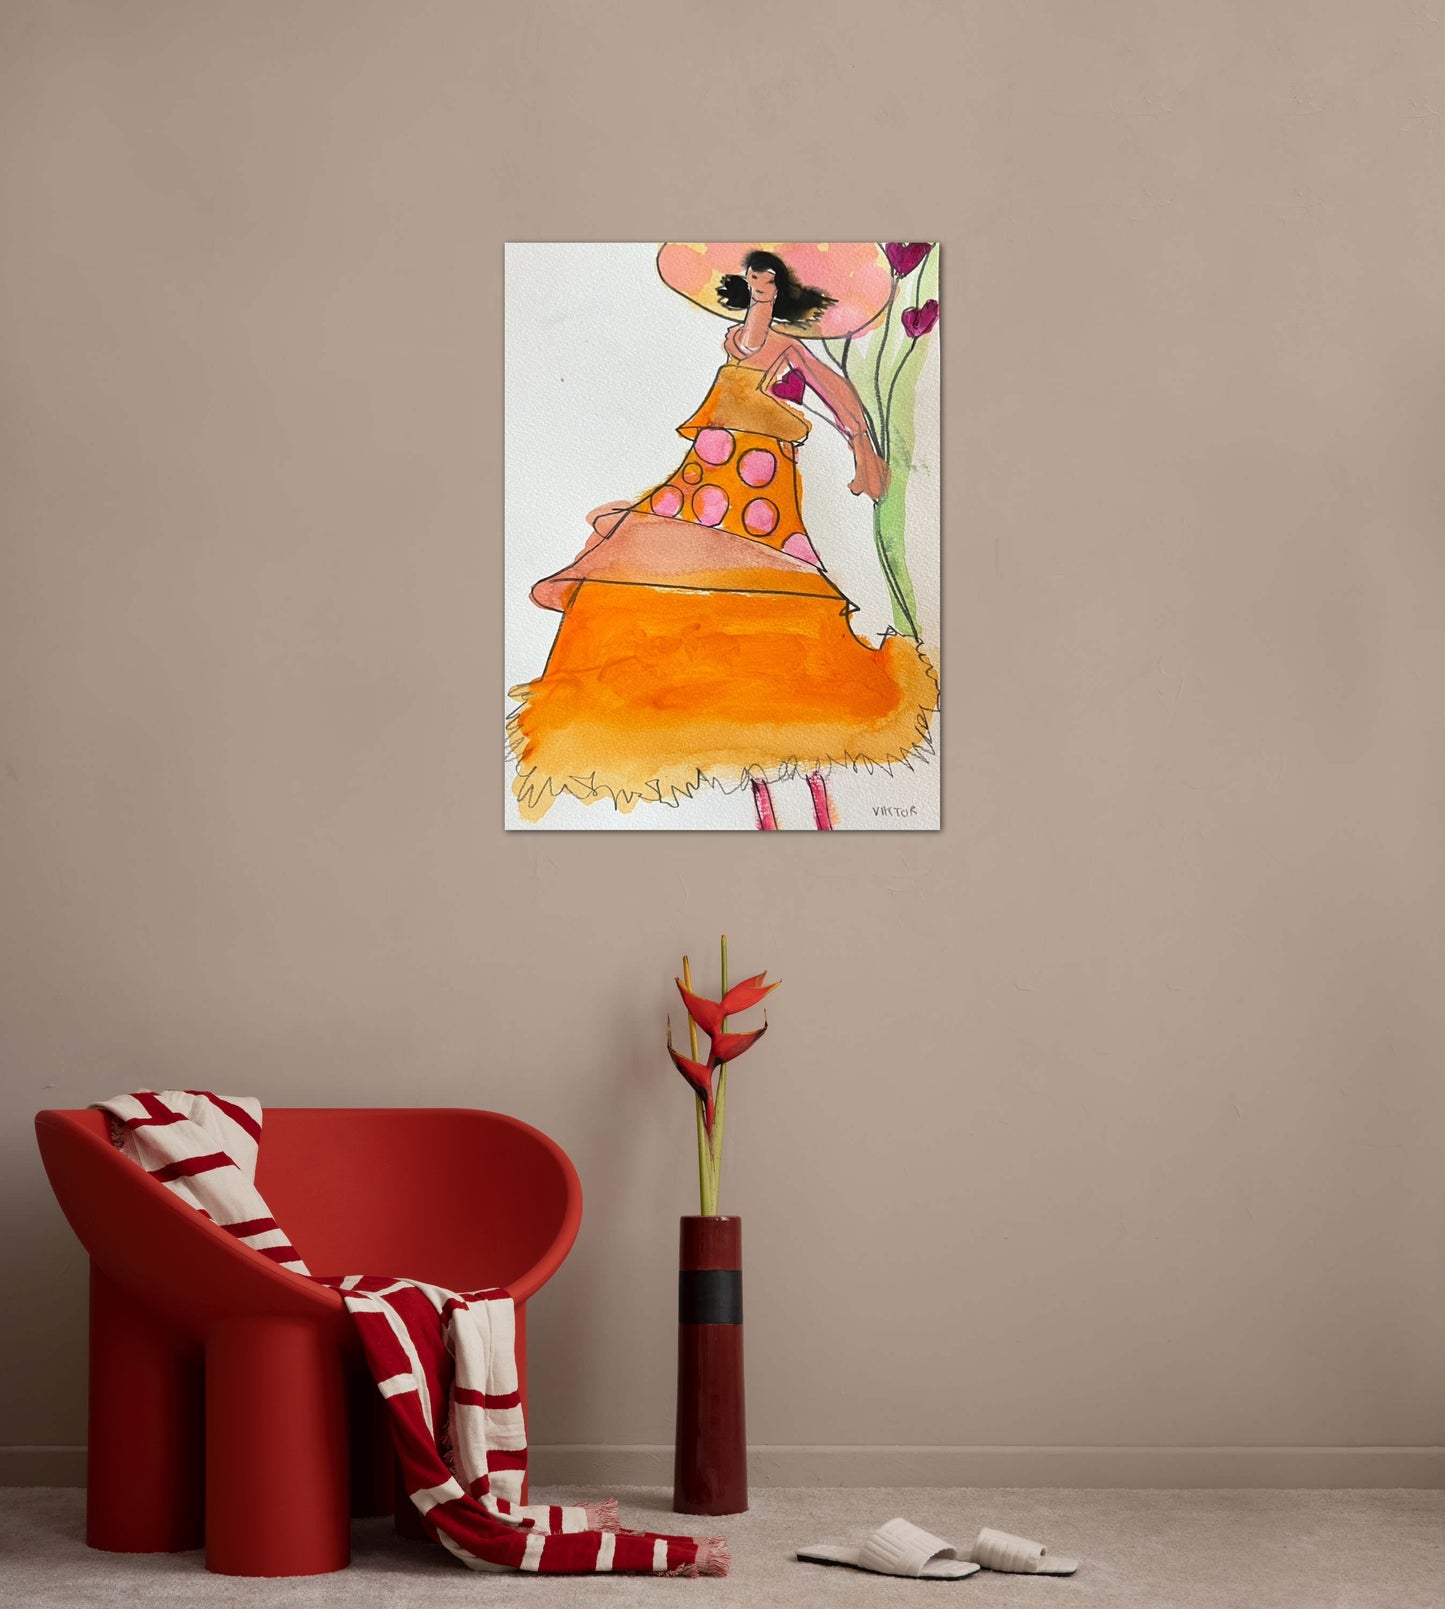 Collection: The Beauty of a Woman, art IV - Print, Poster, Stretched Canvas Print